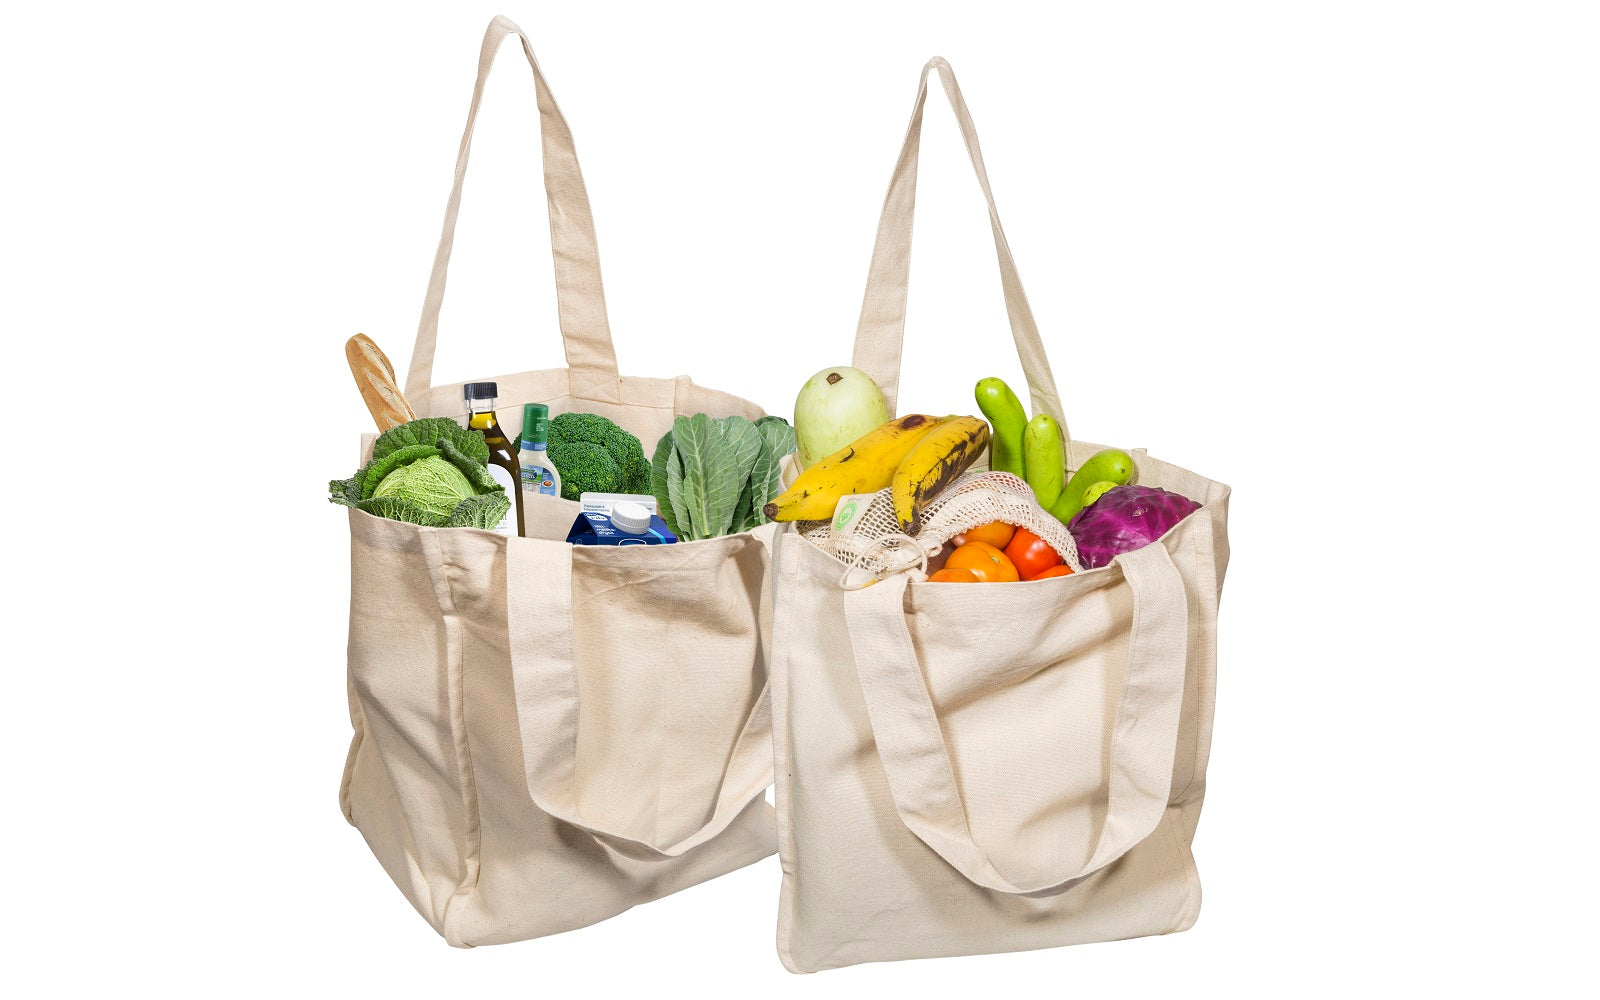 How to Get Rid of Your Worst Reusable Grocery Bags | Lifehacker